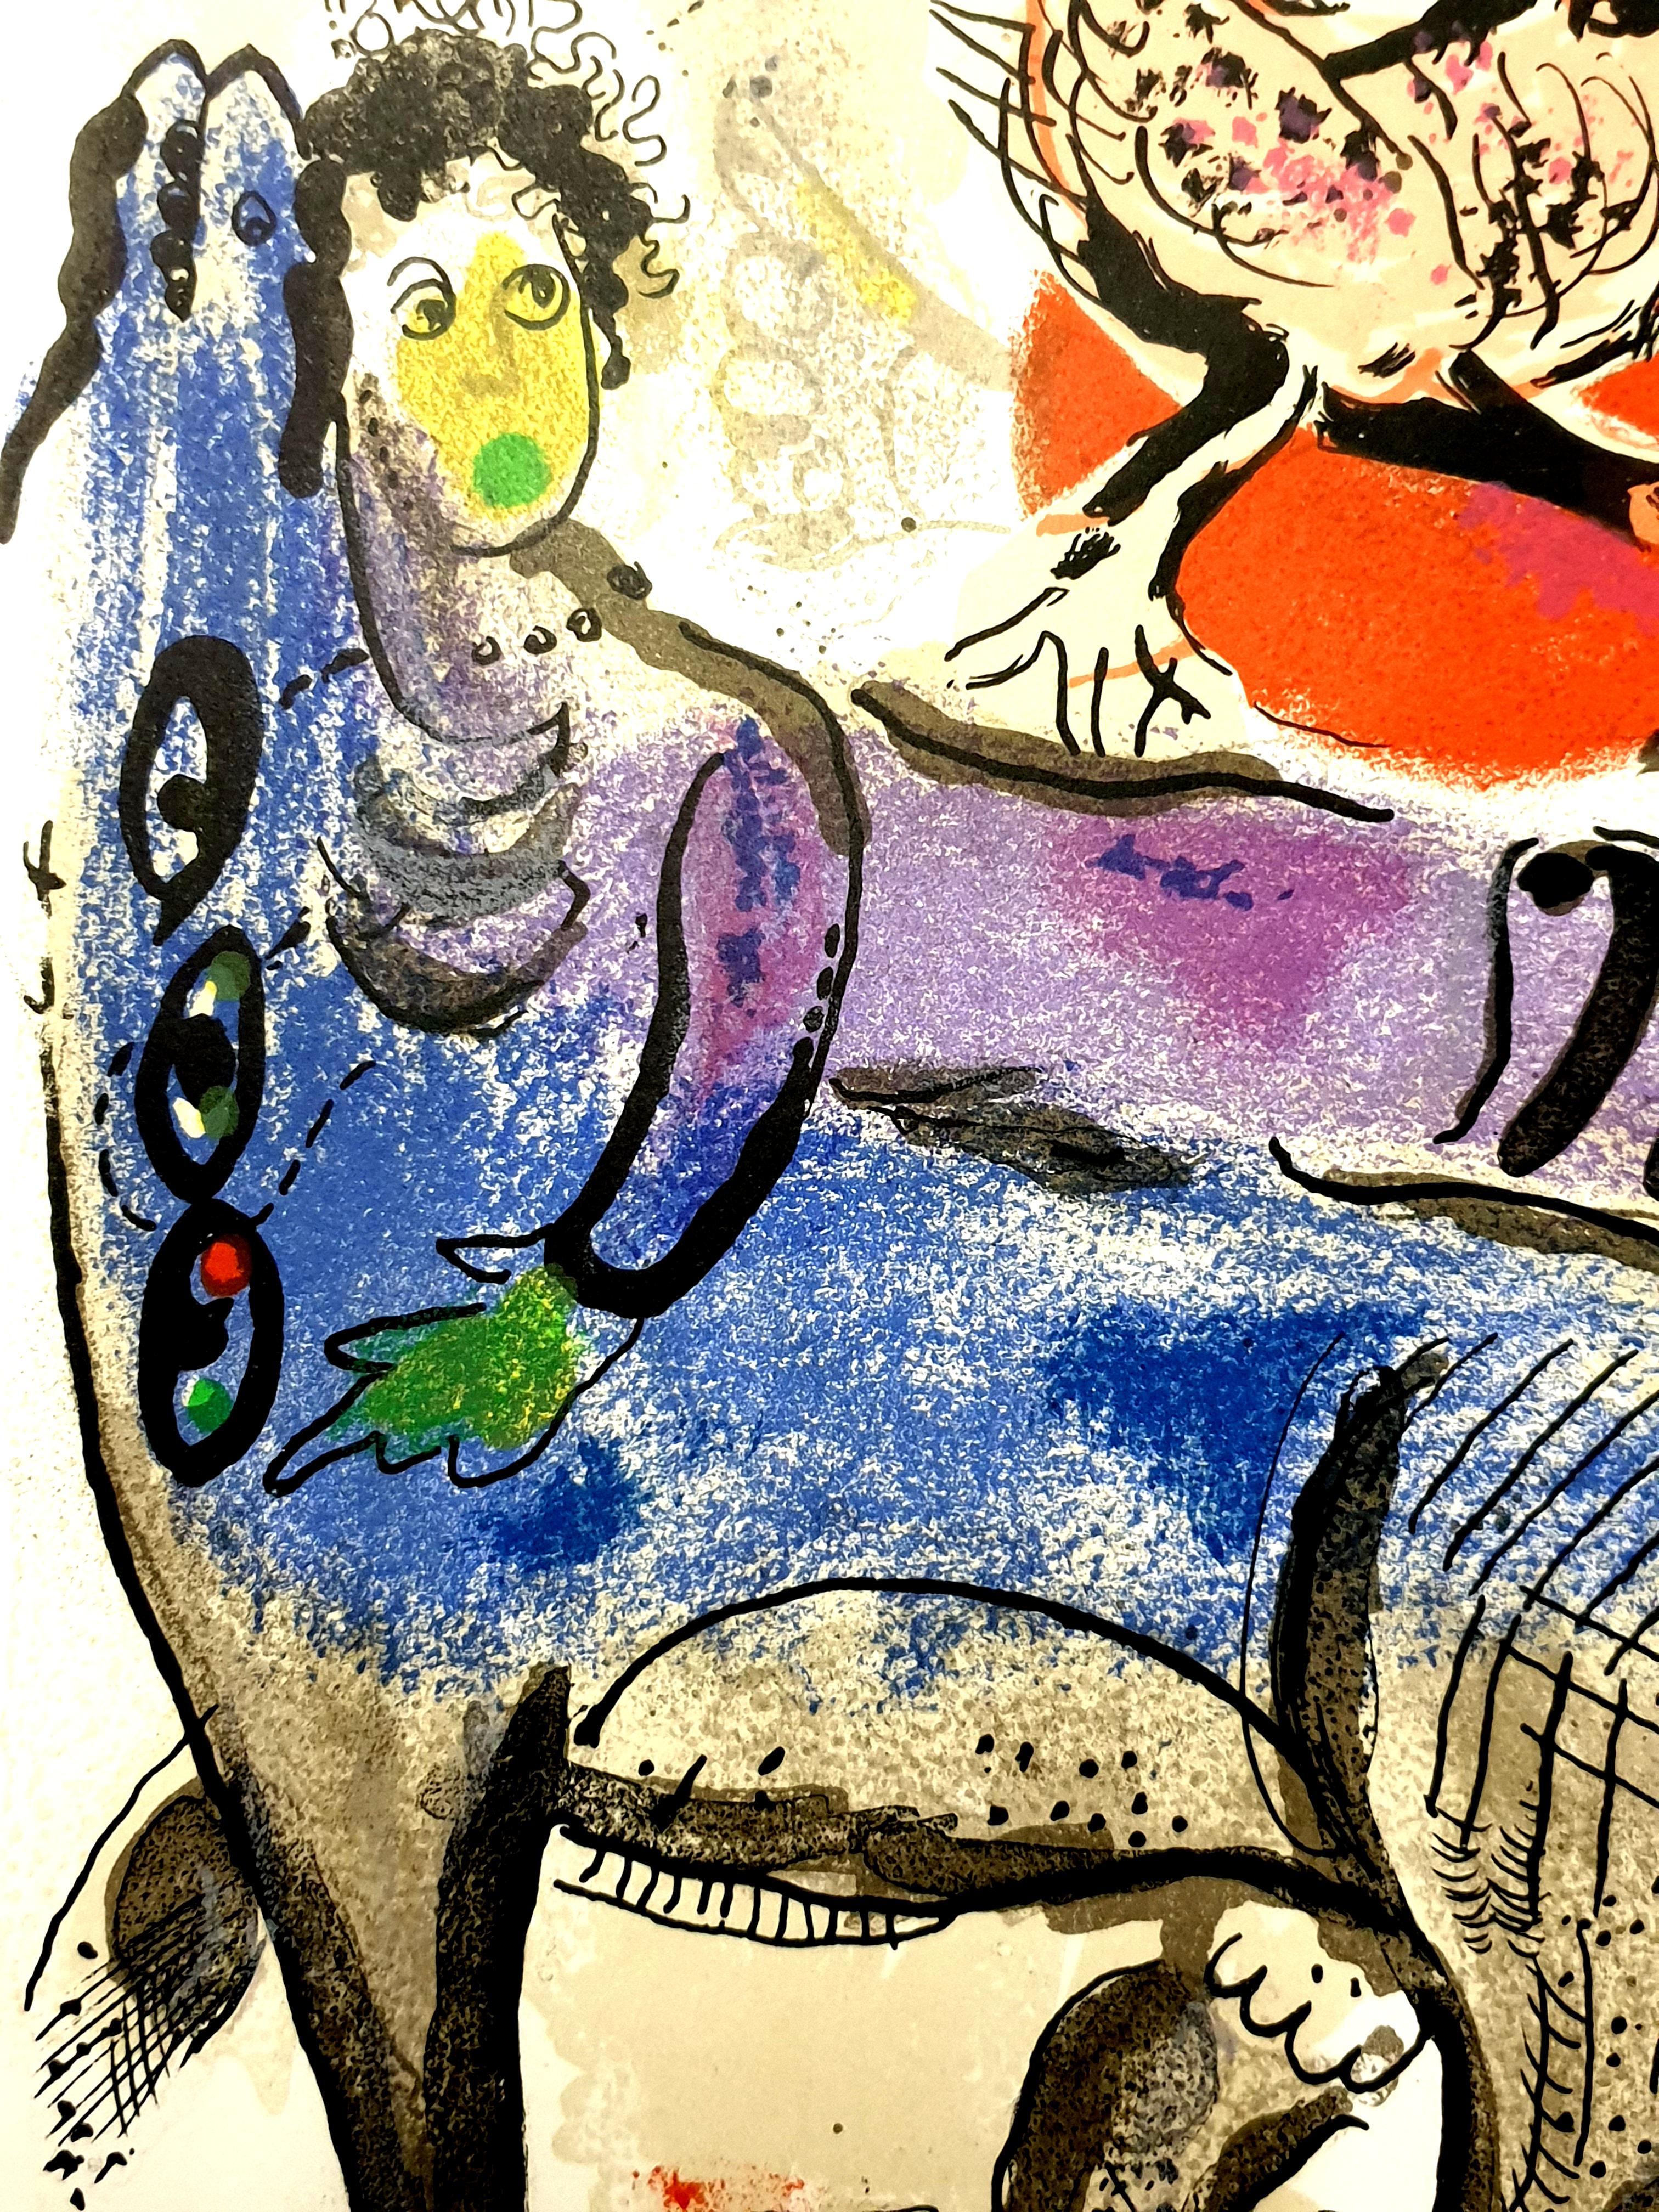 Marc Chagall - Original Lithograph
La Vache Bleue (The Blue Cow)
From the unsigned, unnumbered lithograph printed in the literary review XXe Siecle
1967
See Mourlot 488
Dimensions: 32 x 24 cm 
Publisher: G. di San Lazzaro.

Marc Chagall  (born in